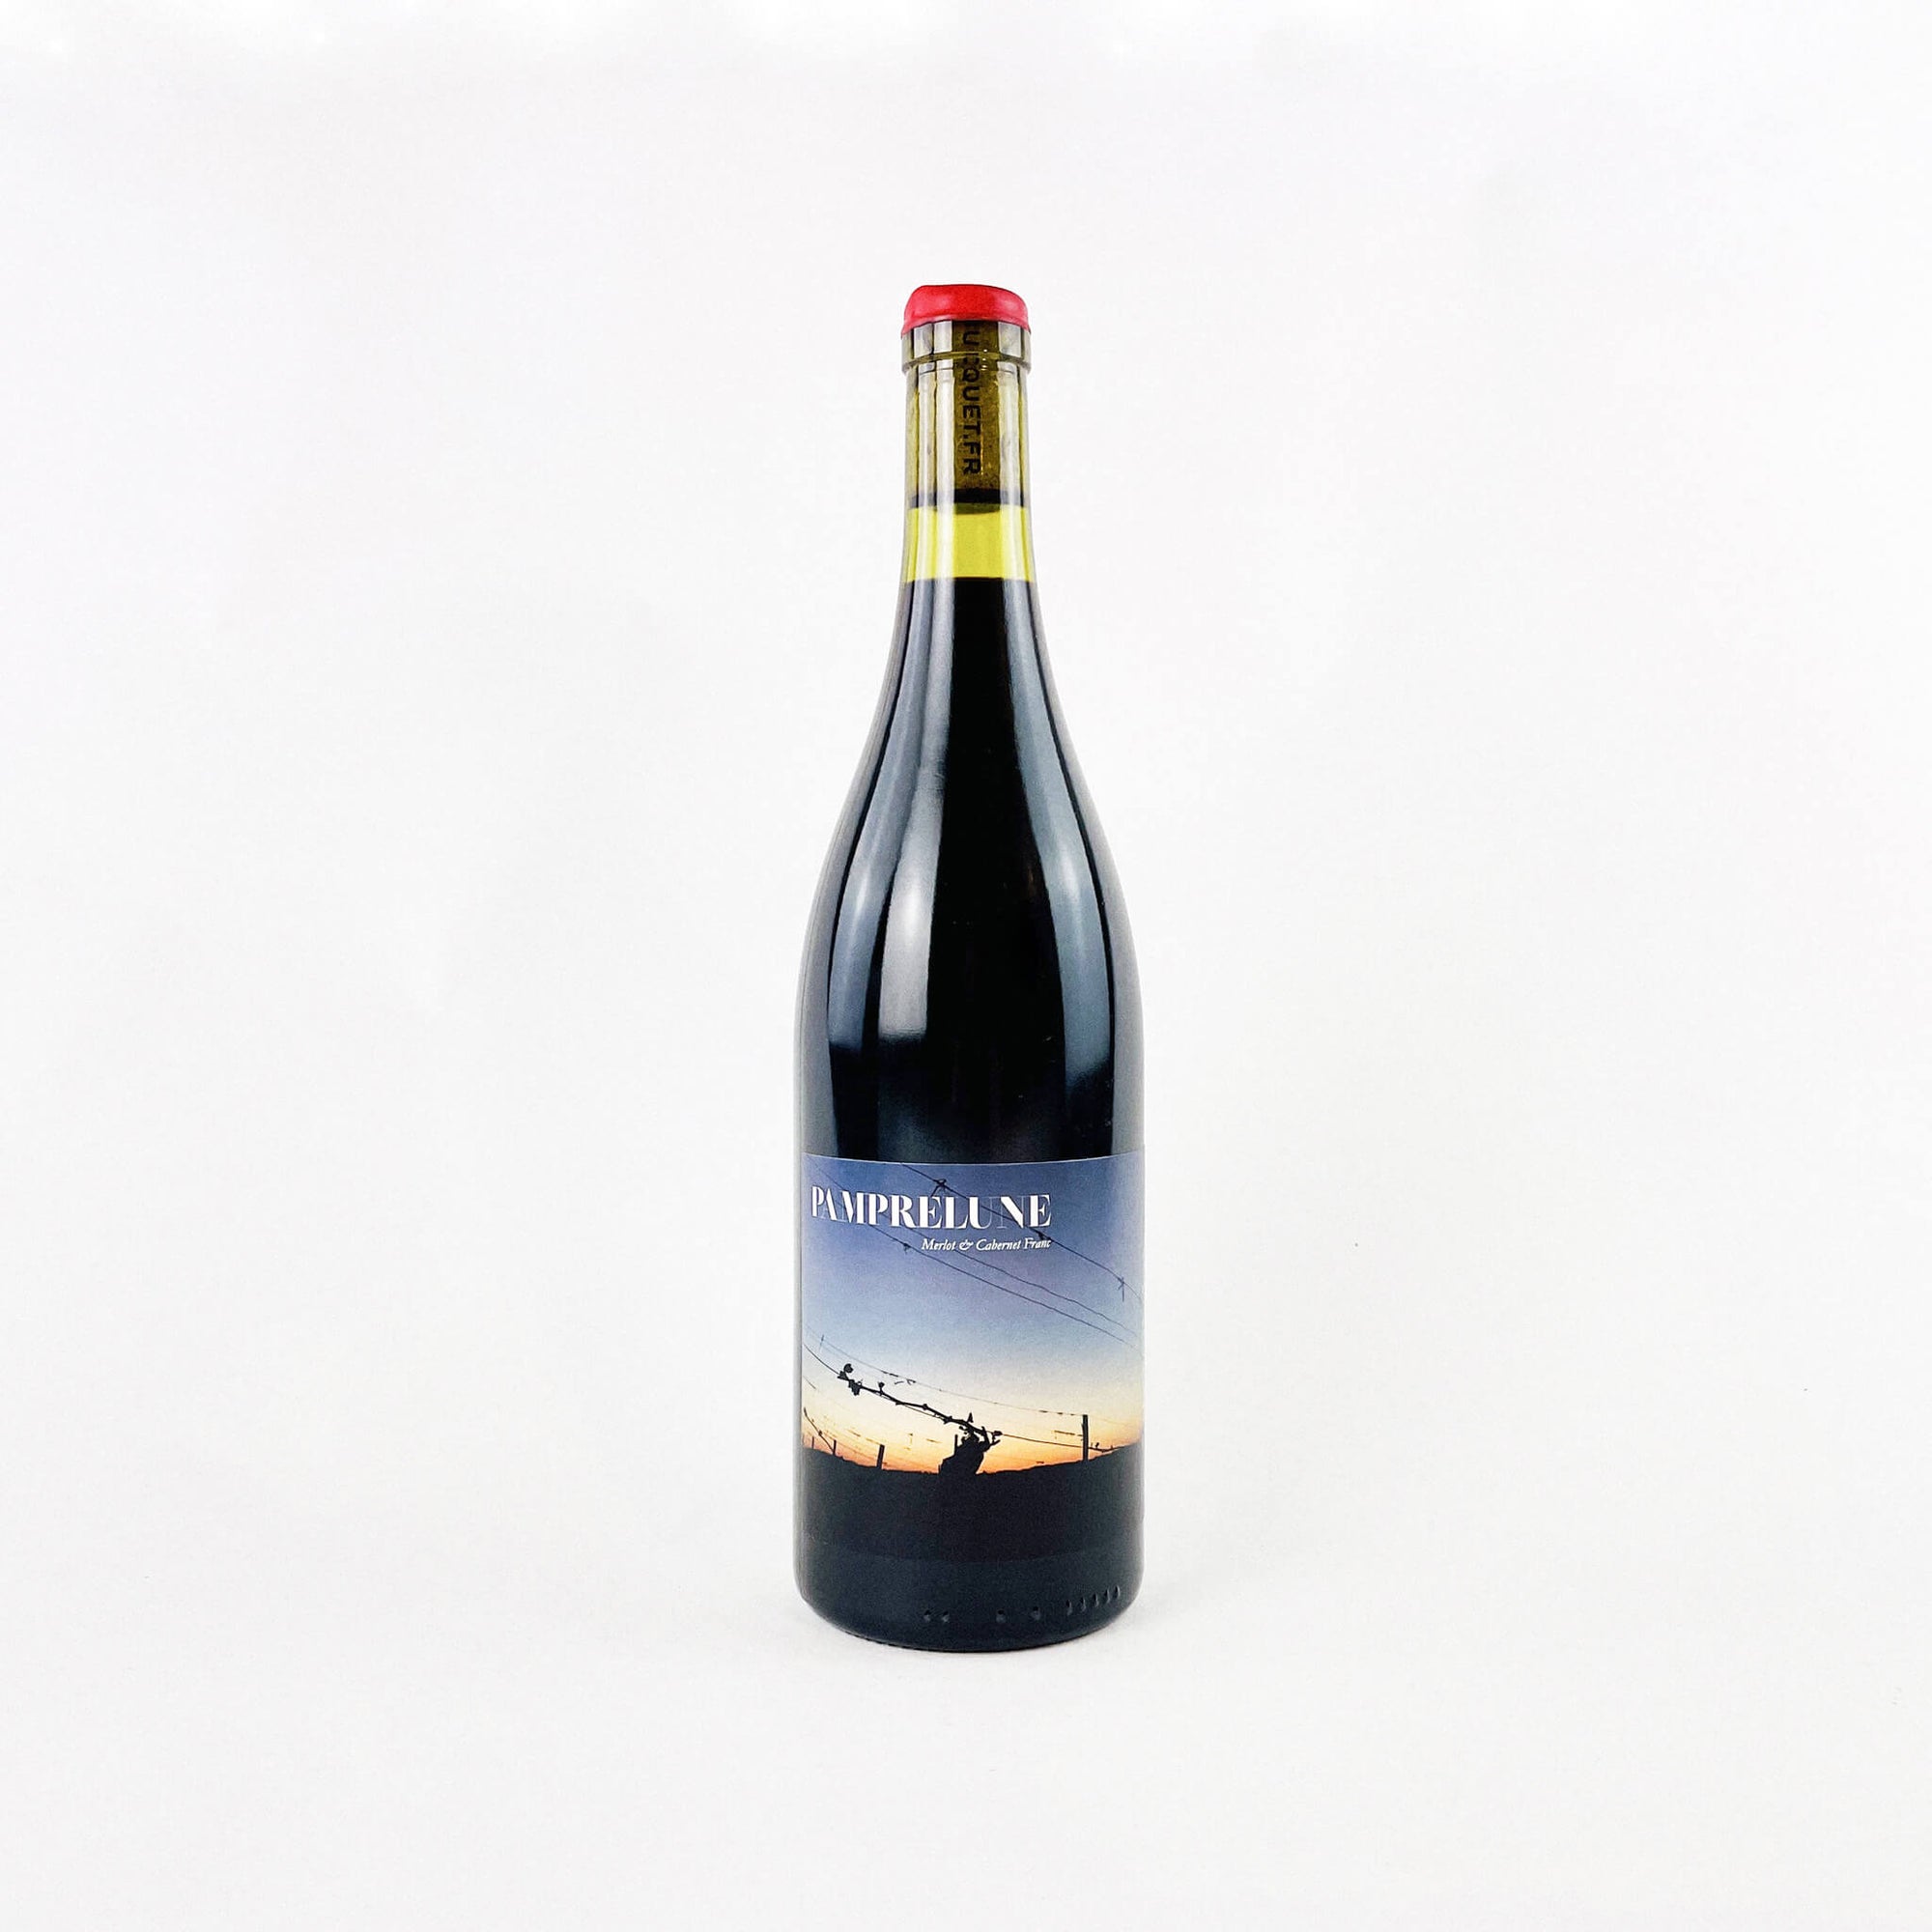 Vignoble Bucquet Pamprelune Natural Red Wine front view